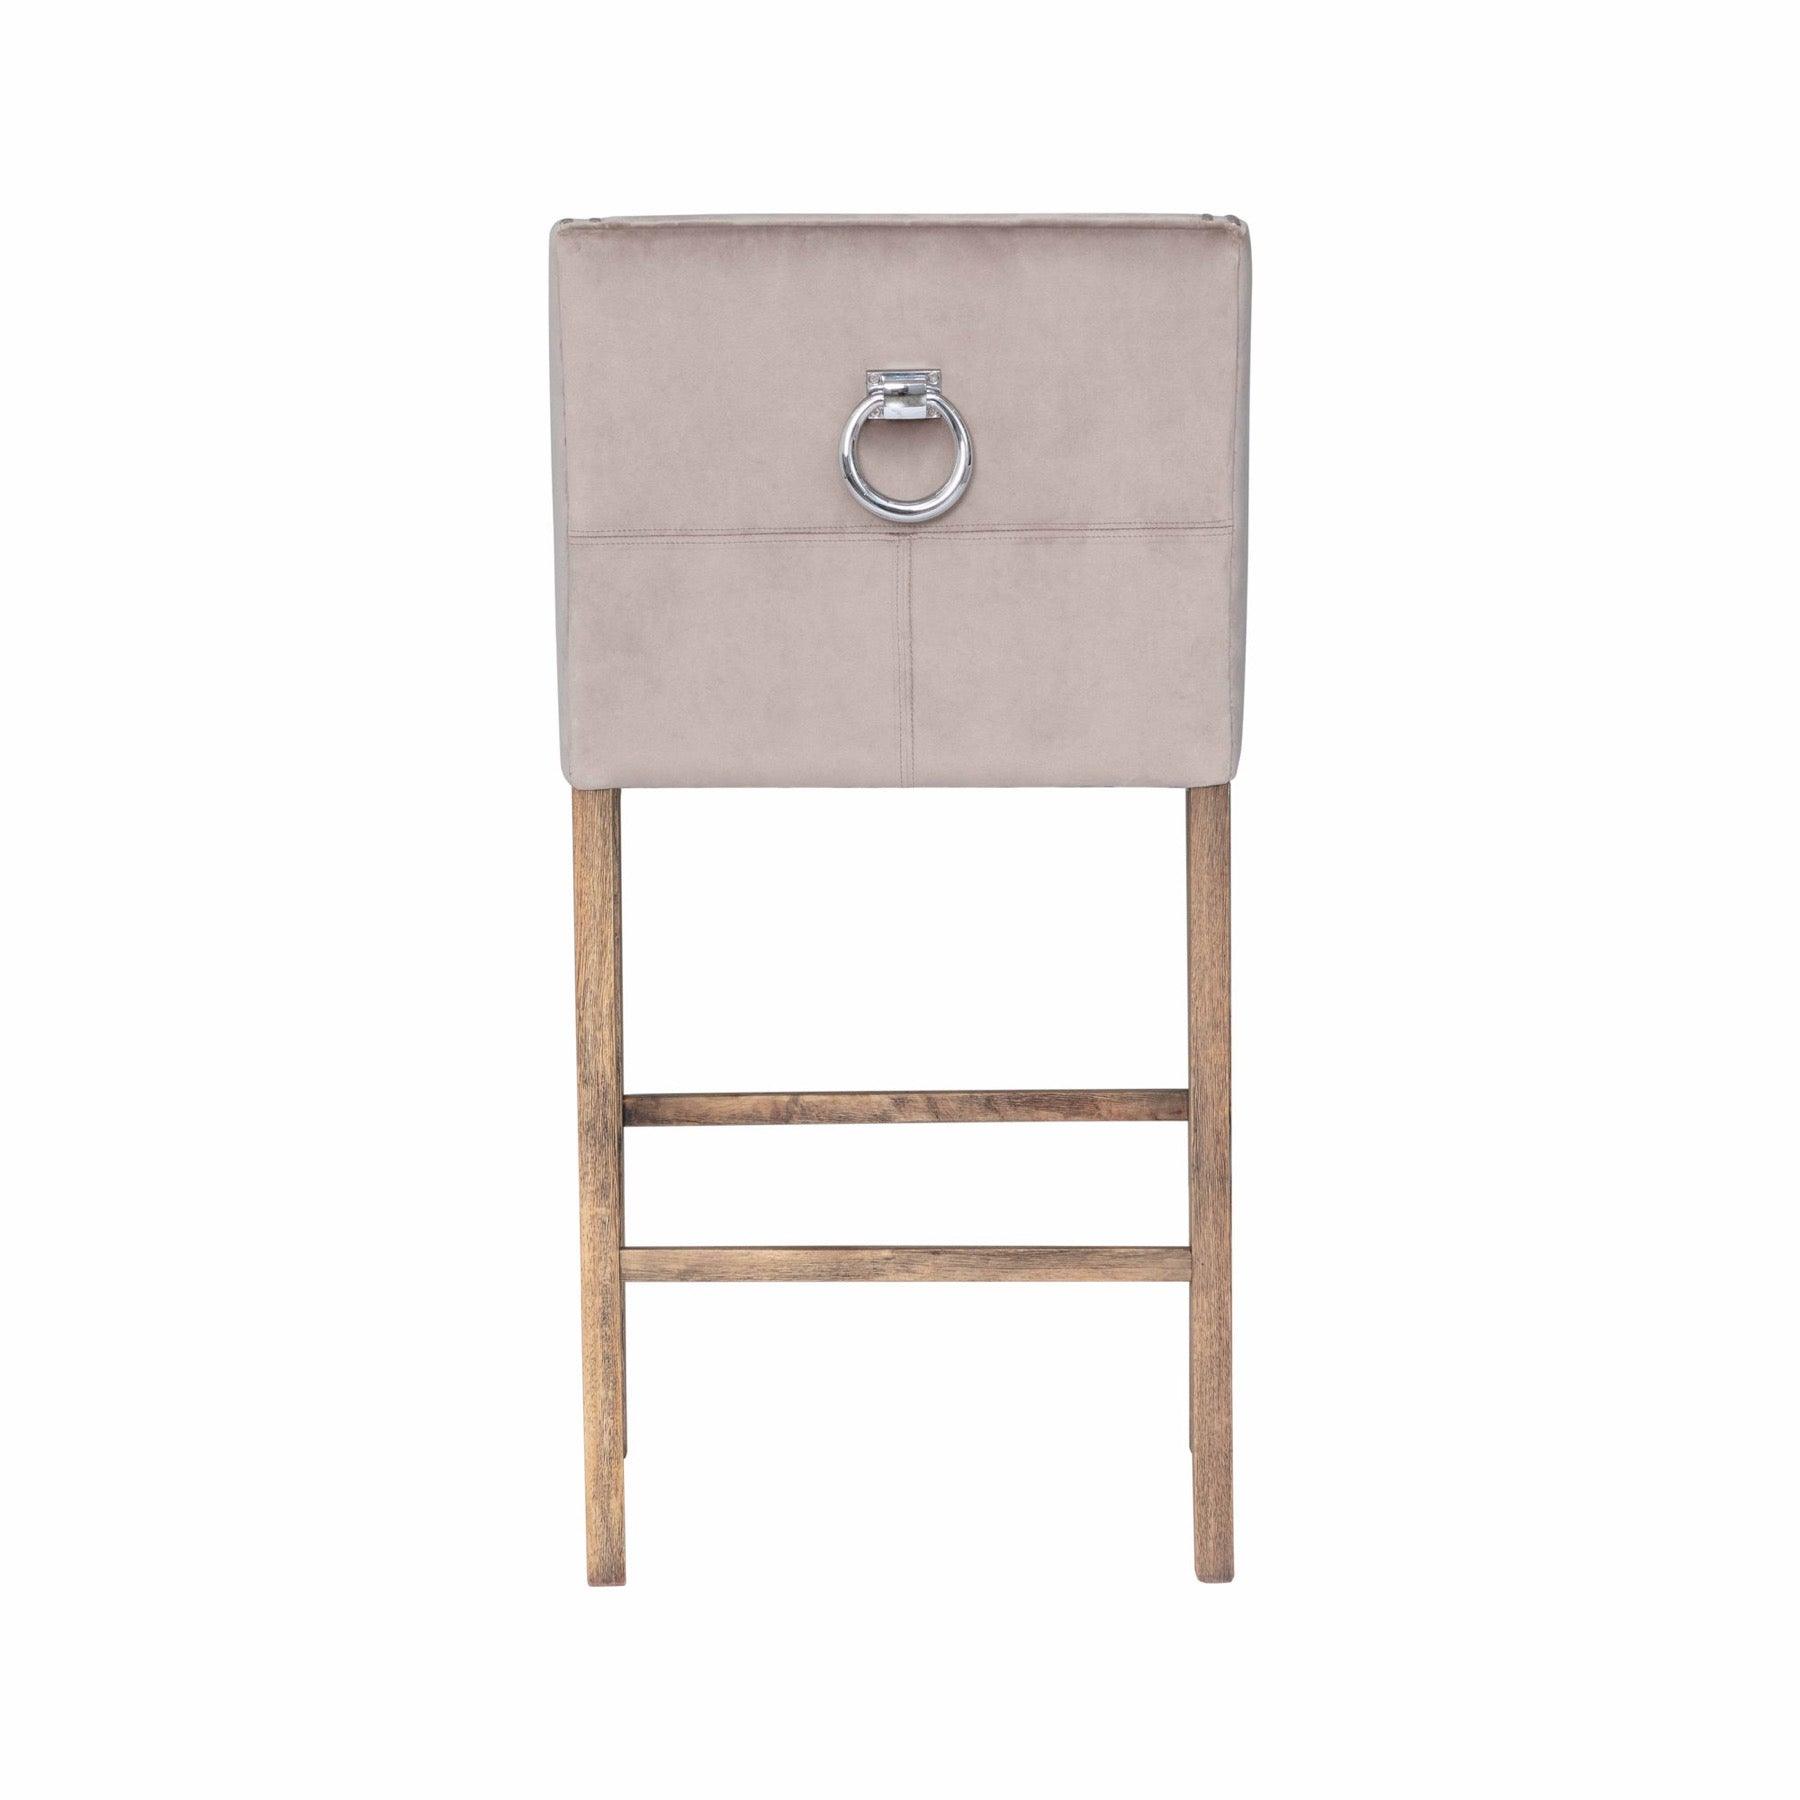 Chelsea Ring Back Bar Stool - Vookoo Lifestyle